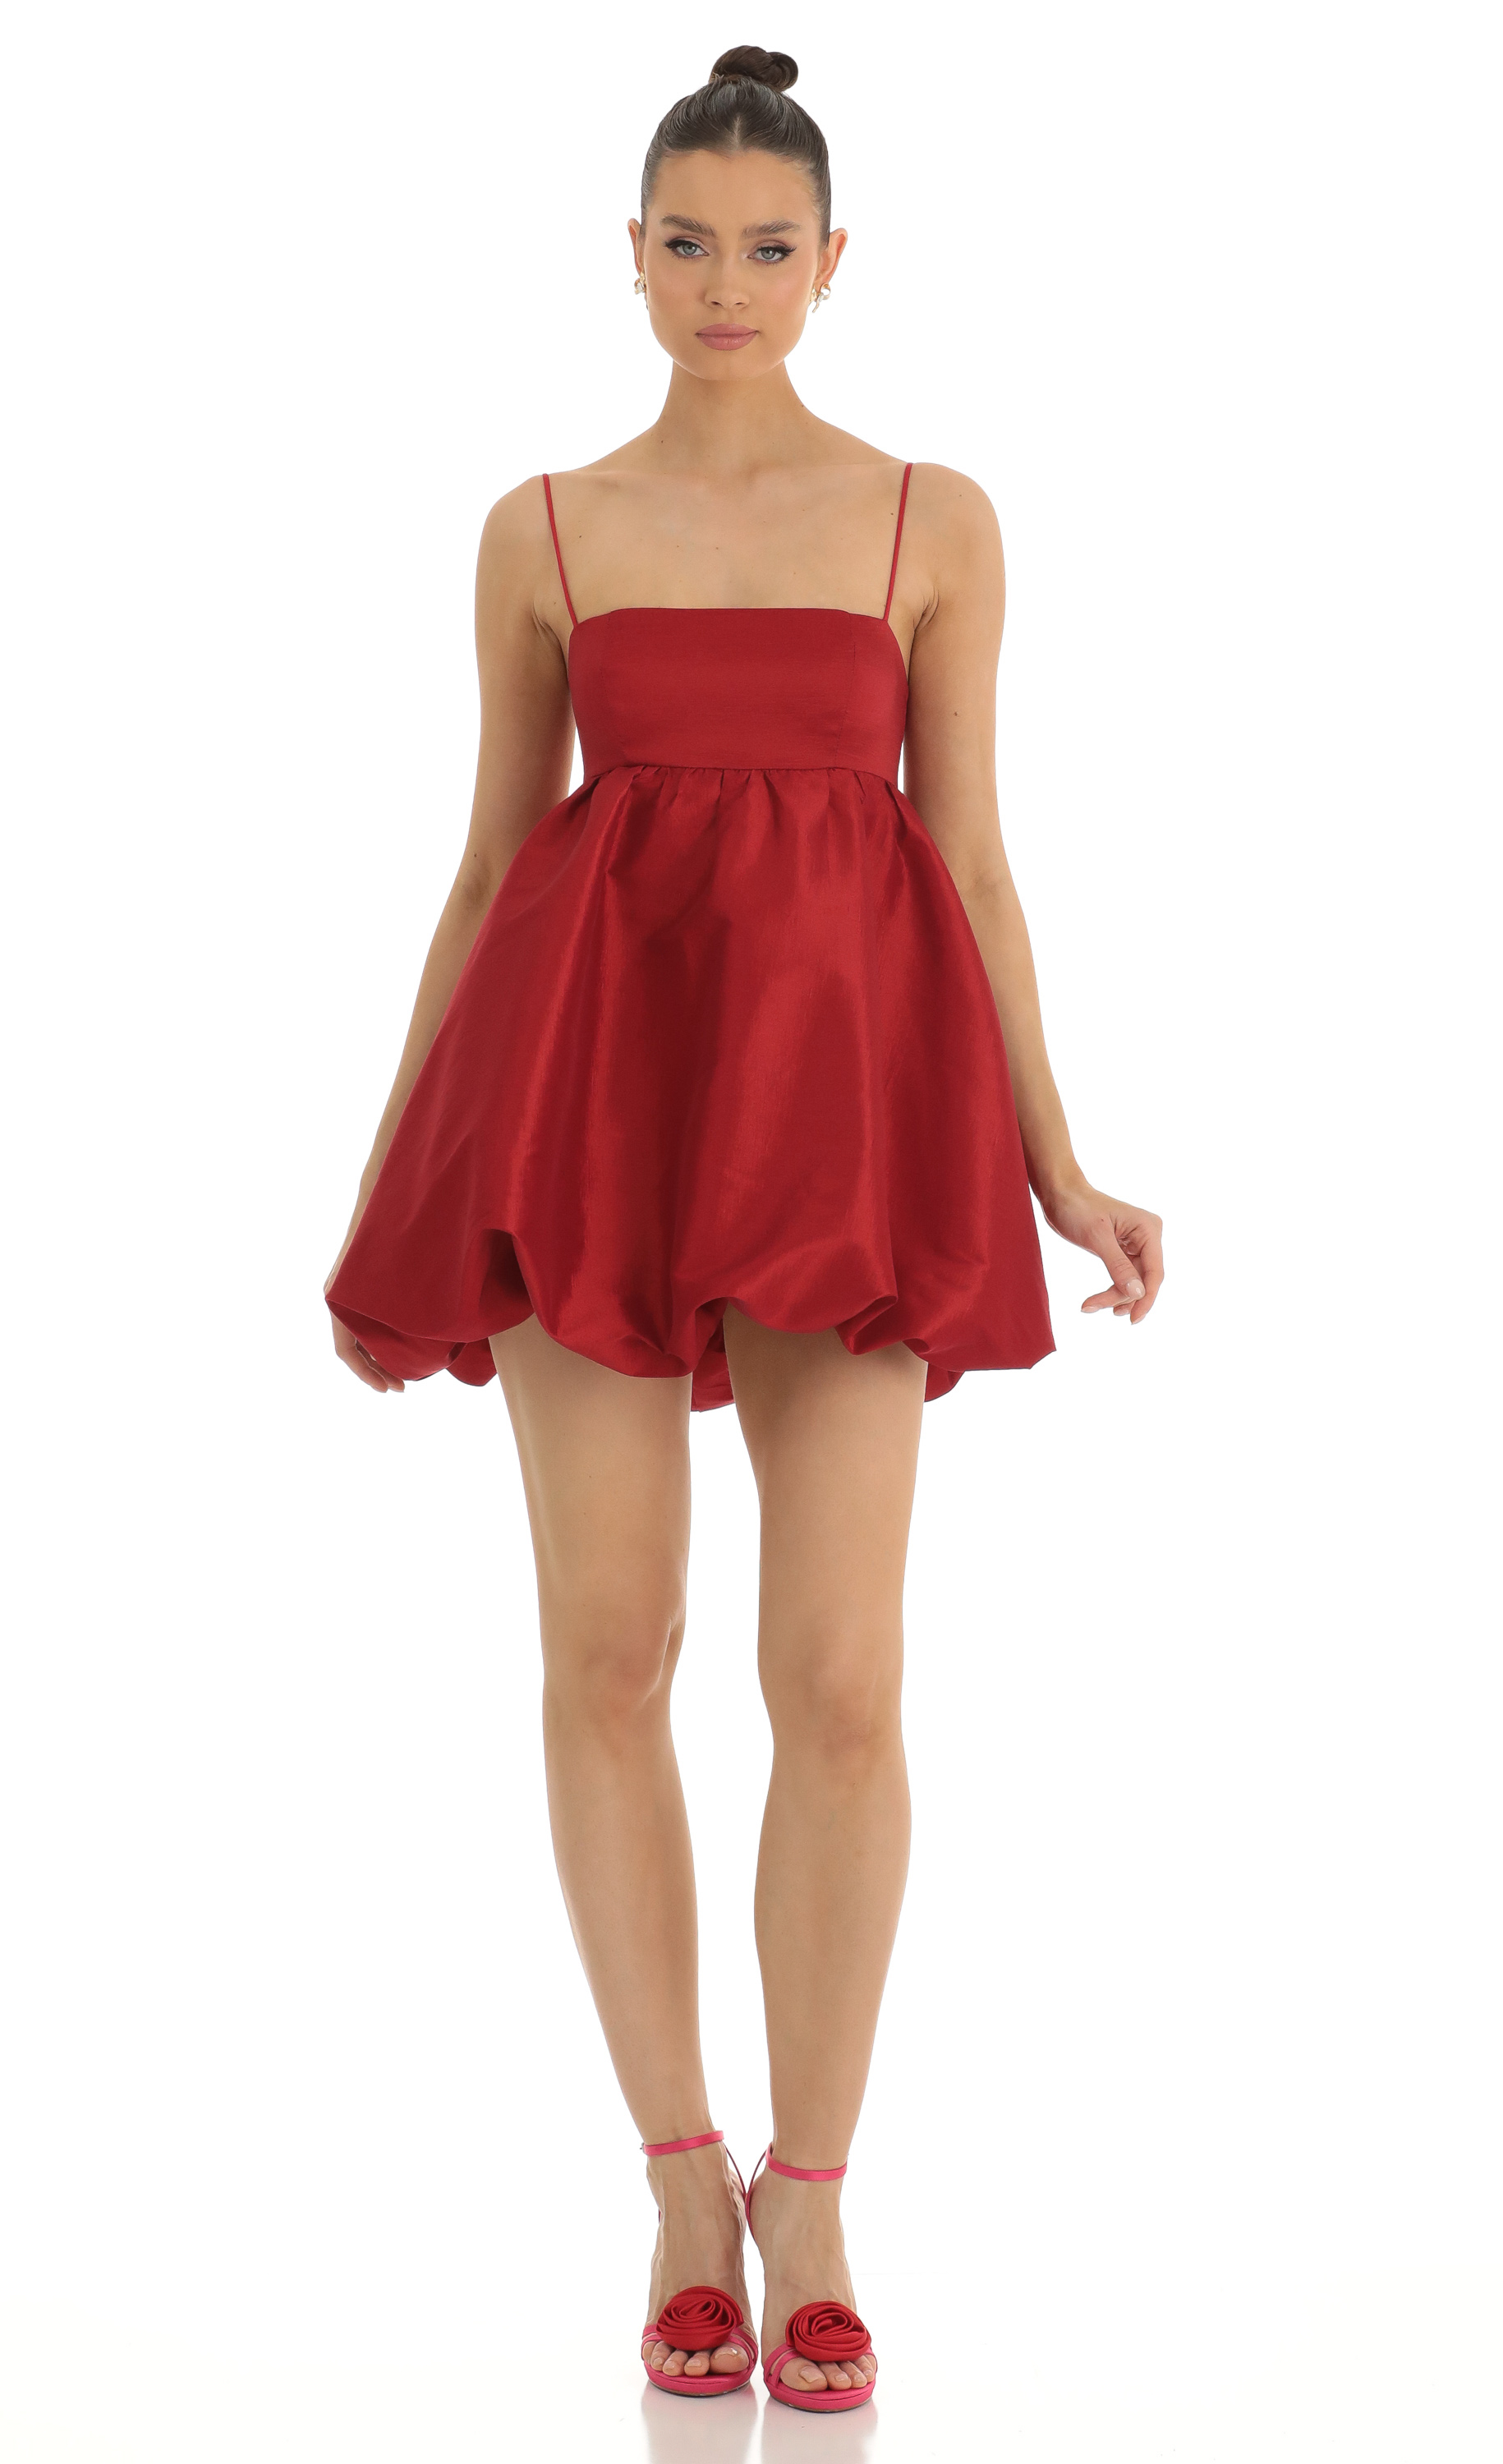 Natia Bubble Skirt Baby Doll Dress in Red